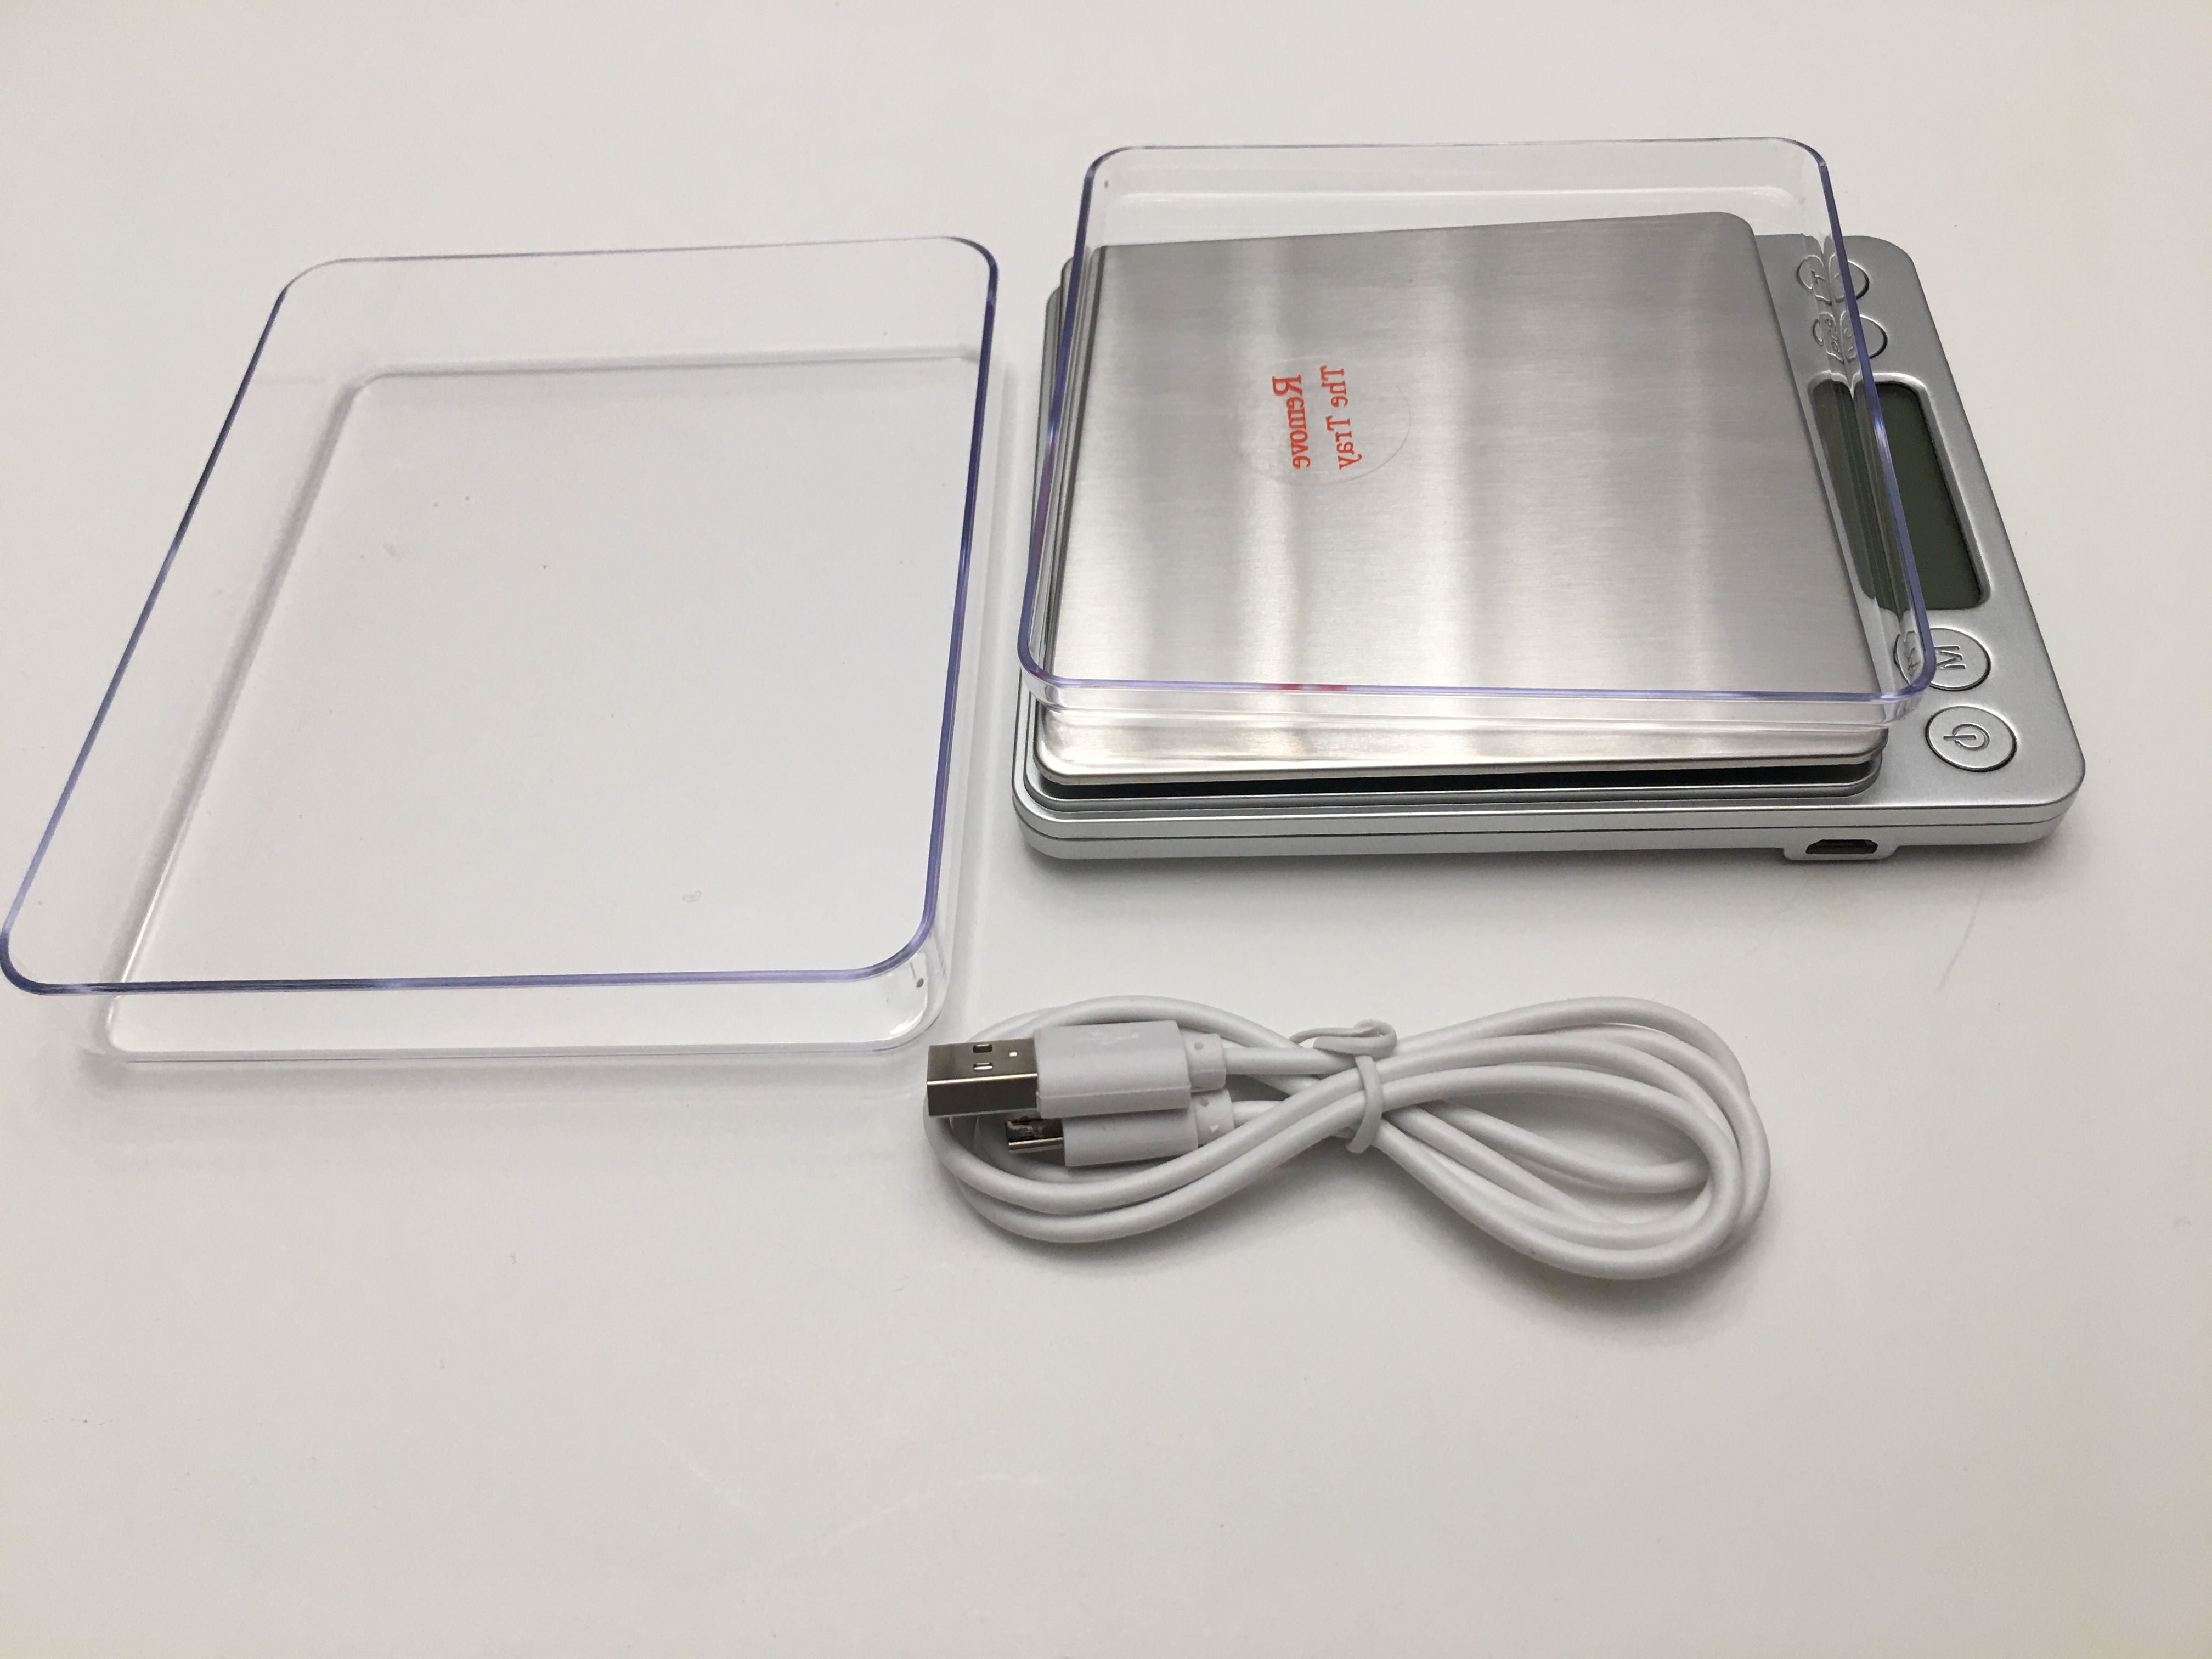 Rechargeable 500g (1lb) scale with .01g (.00035oz) accuracy